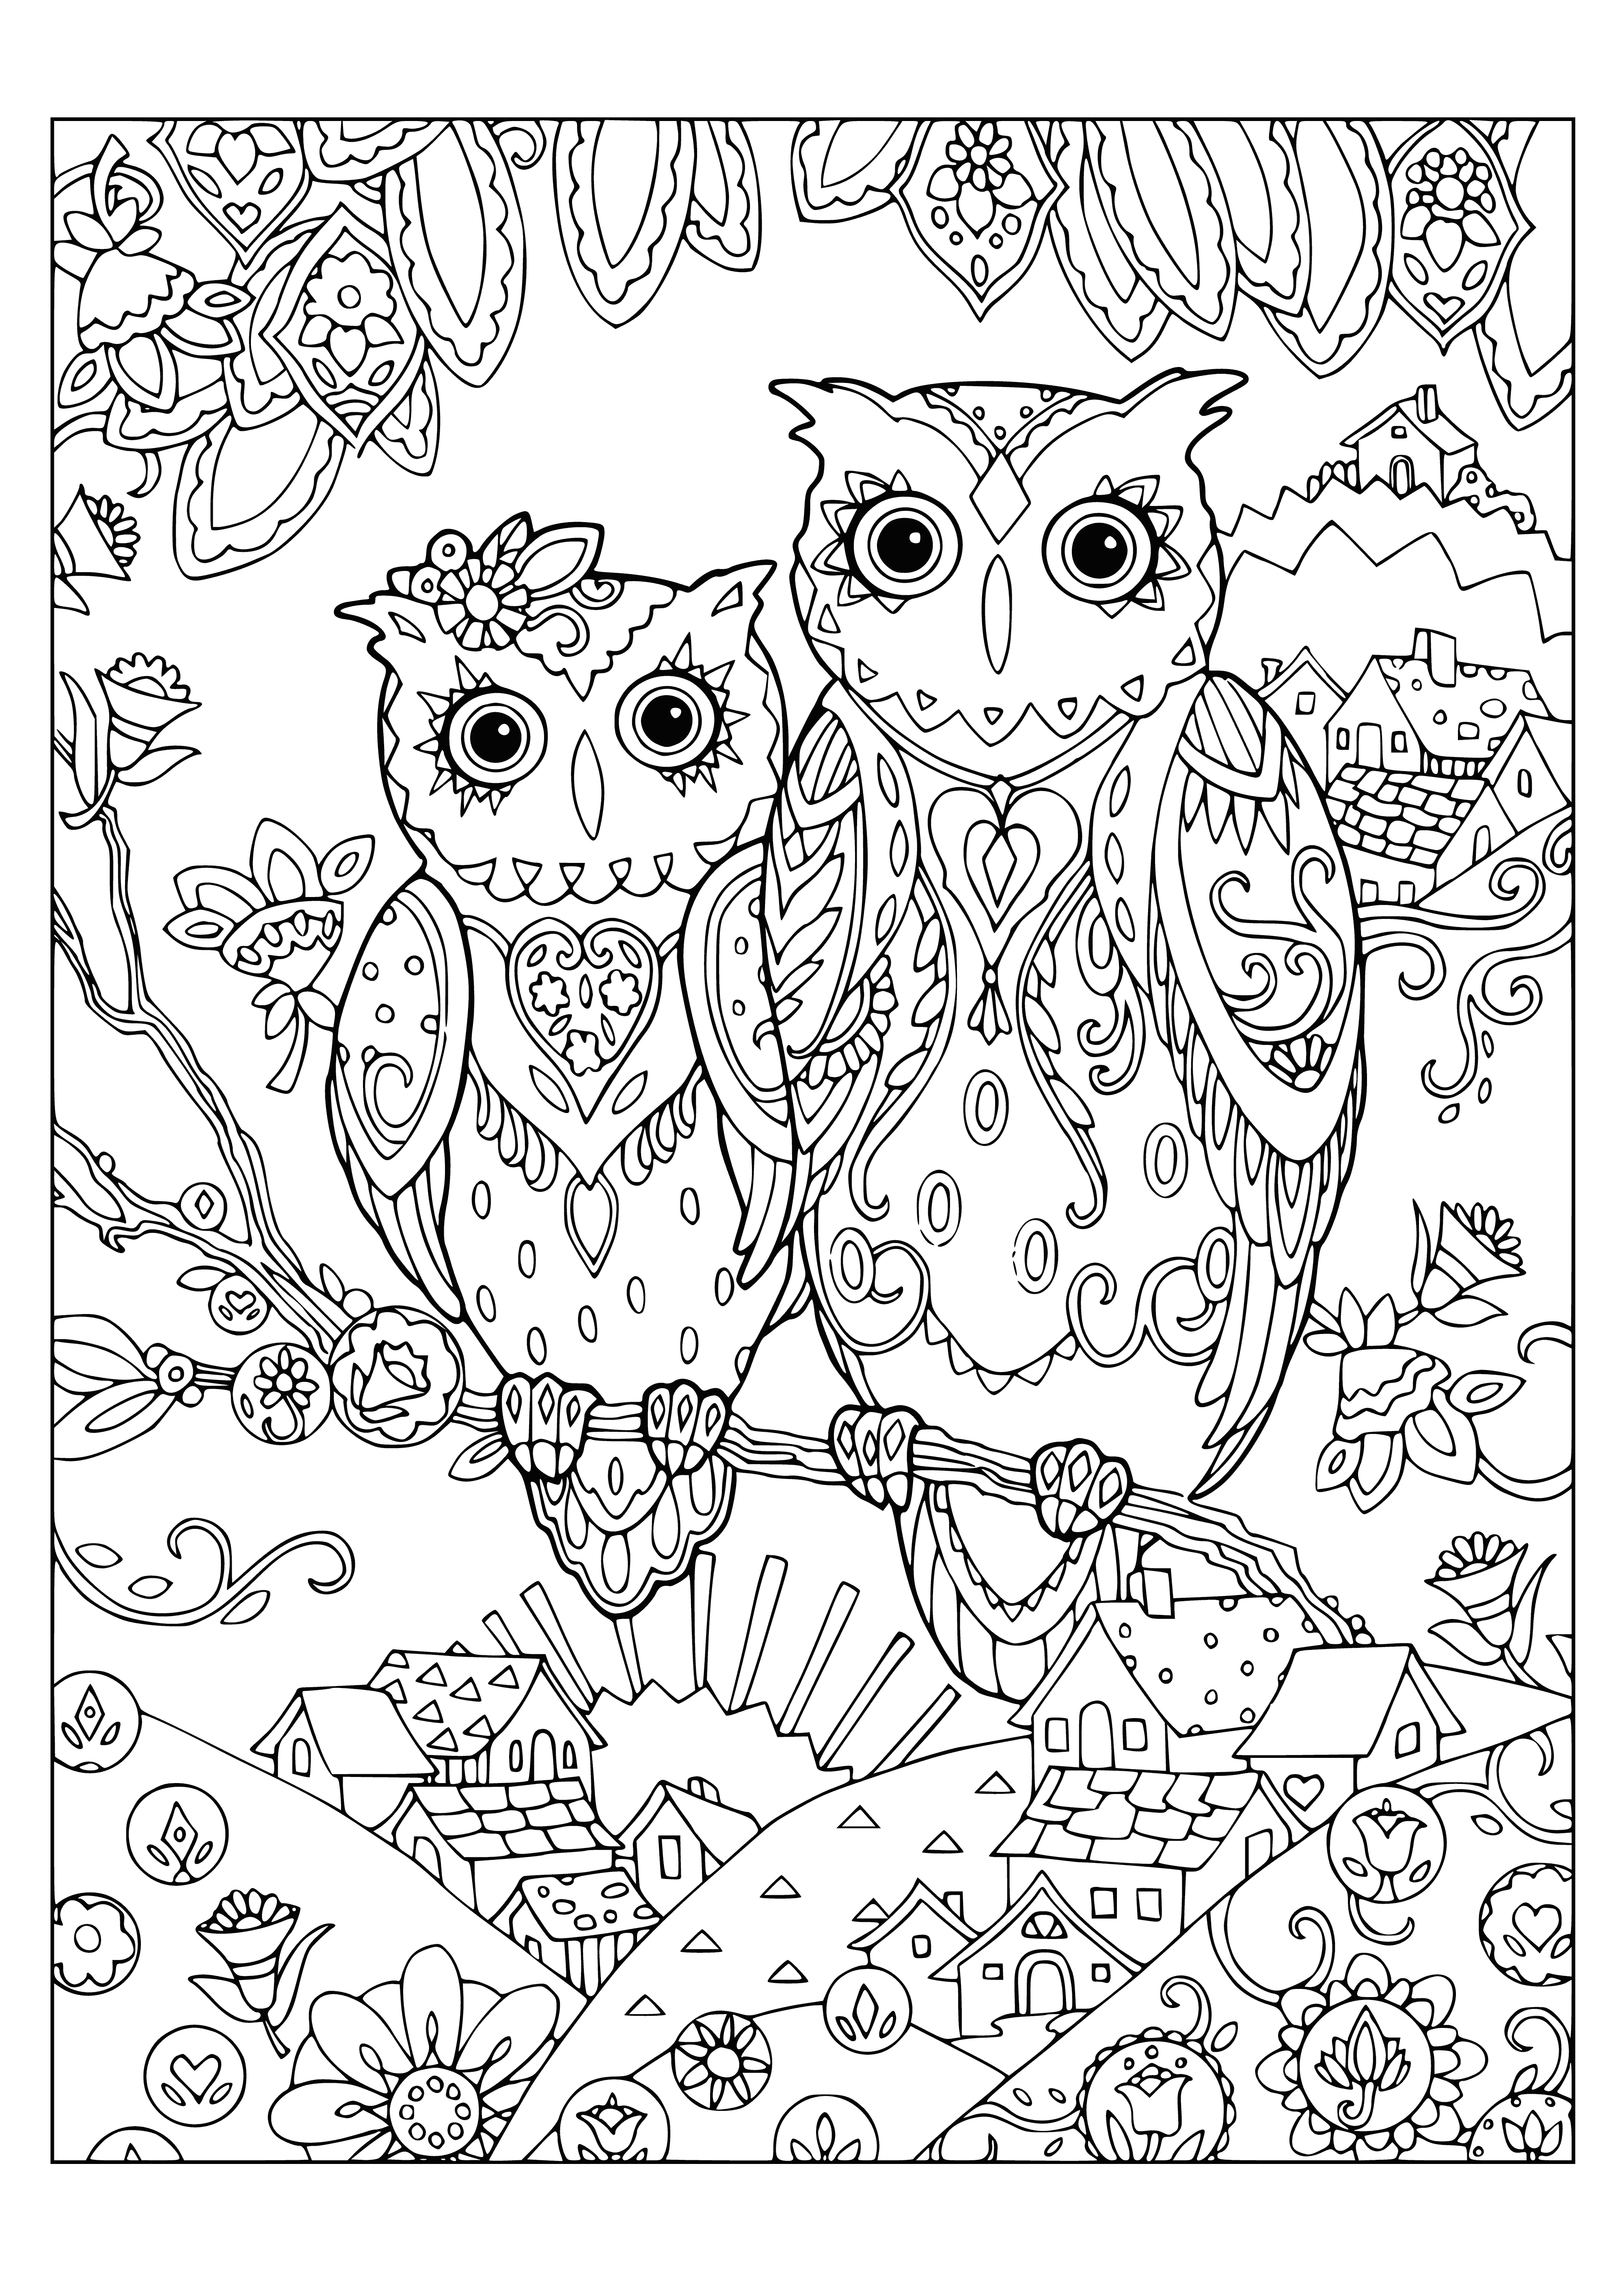 Fabulous apartment coloring page